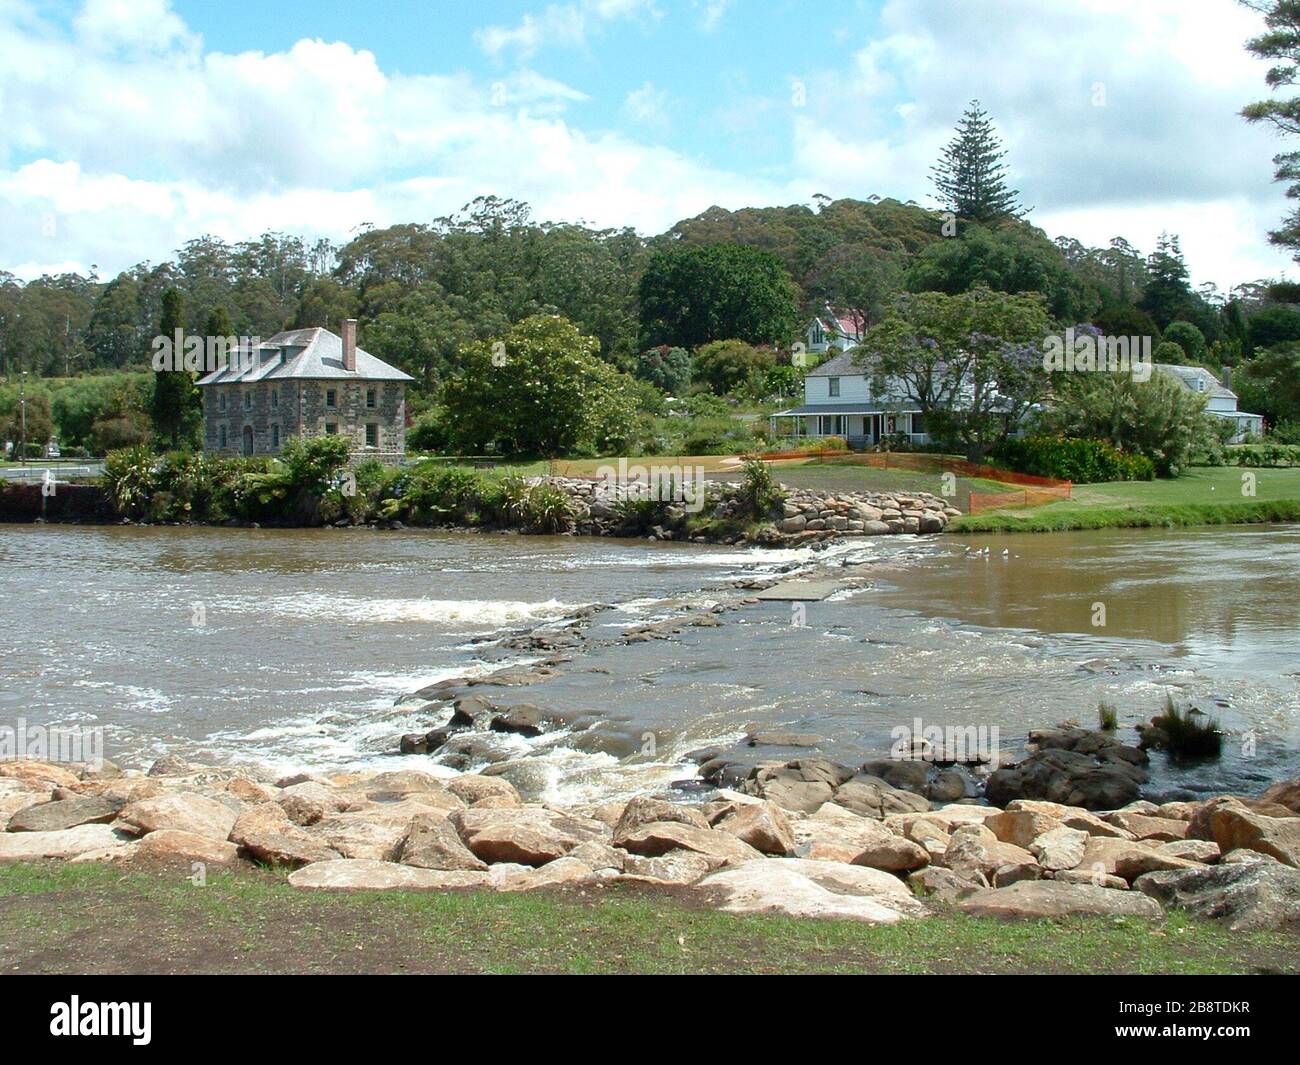 English: Photo of point where Kerikeri River meets the Pacific Ocean at top of Kerikeri Inlet in the Bay Of Islands, New Zealand The old stone store bridge was